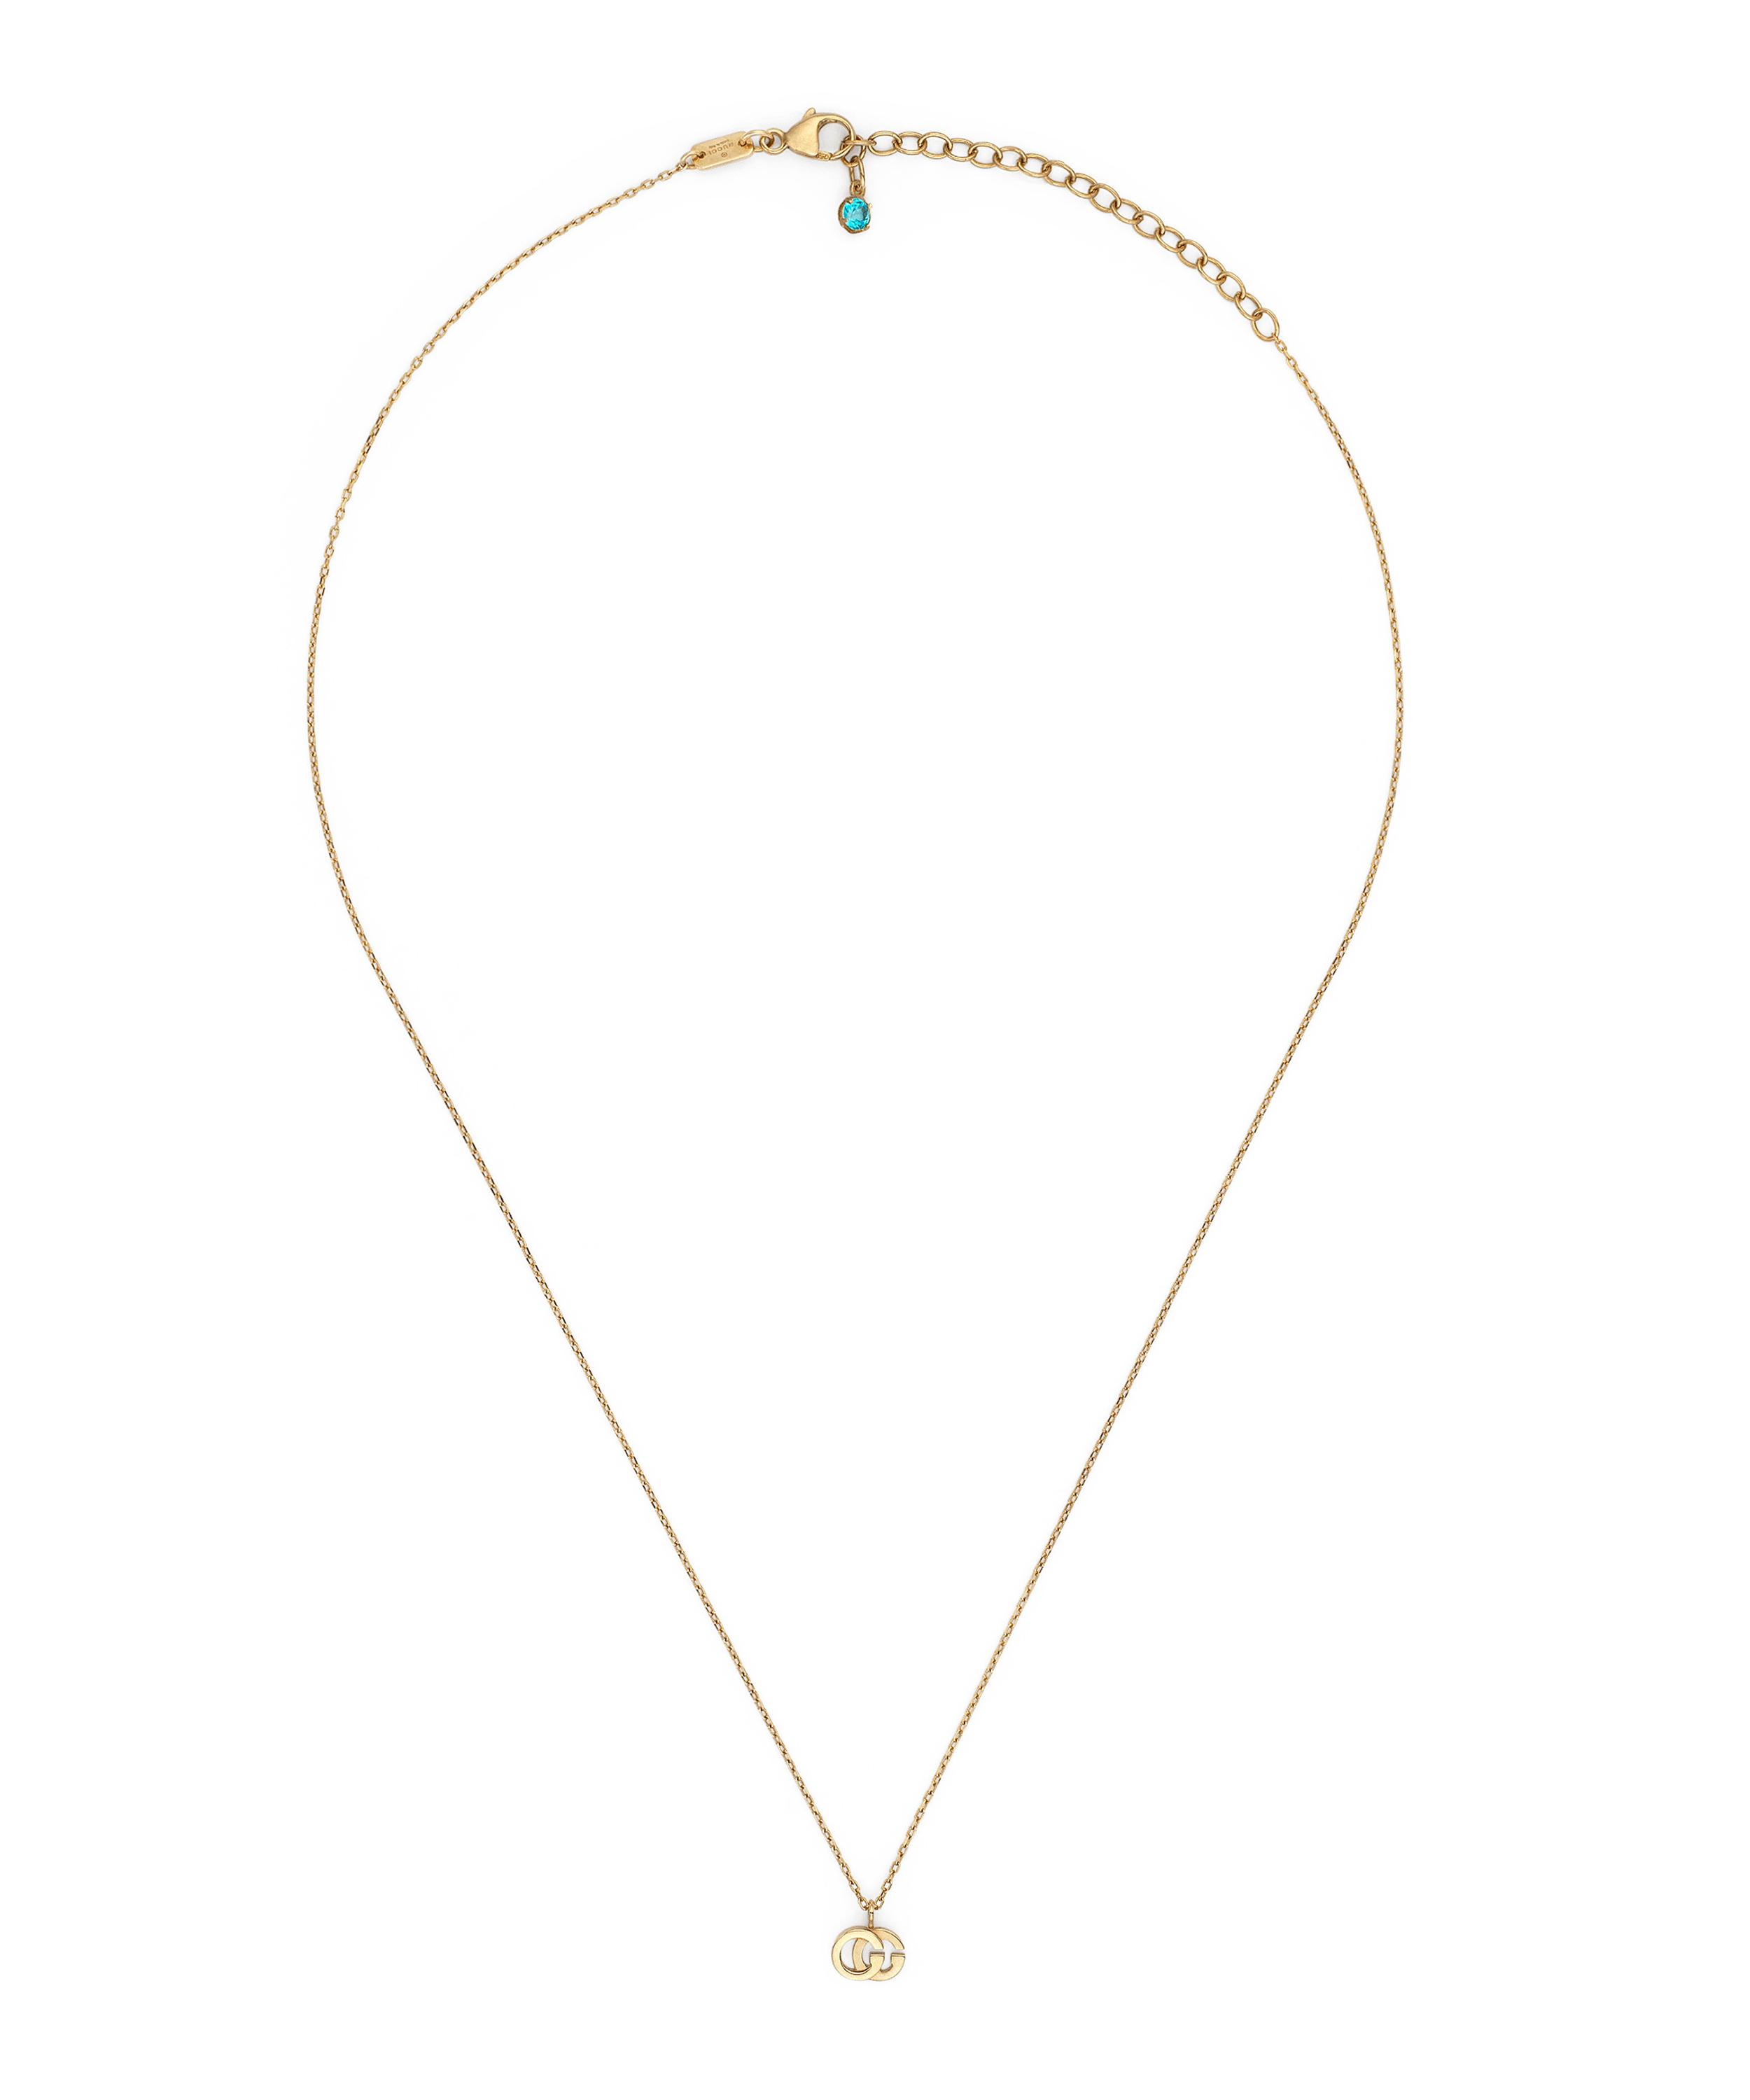 GUCCI GOLD GG RUNNING BLUE TOPAZ NECKLACE,000645377